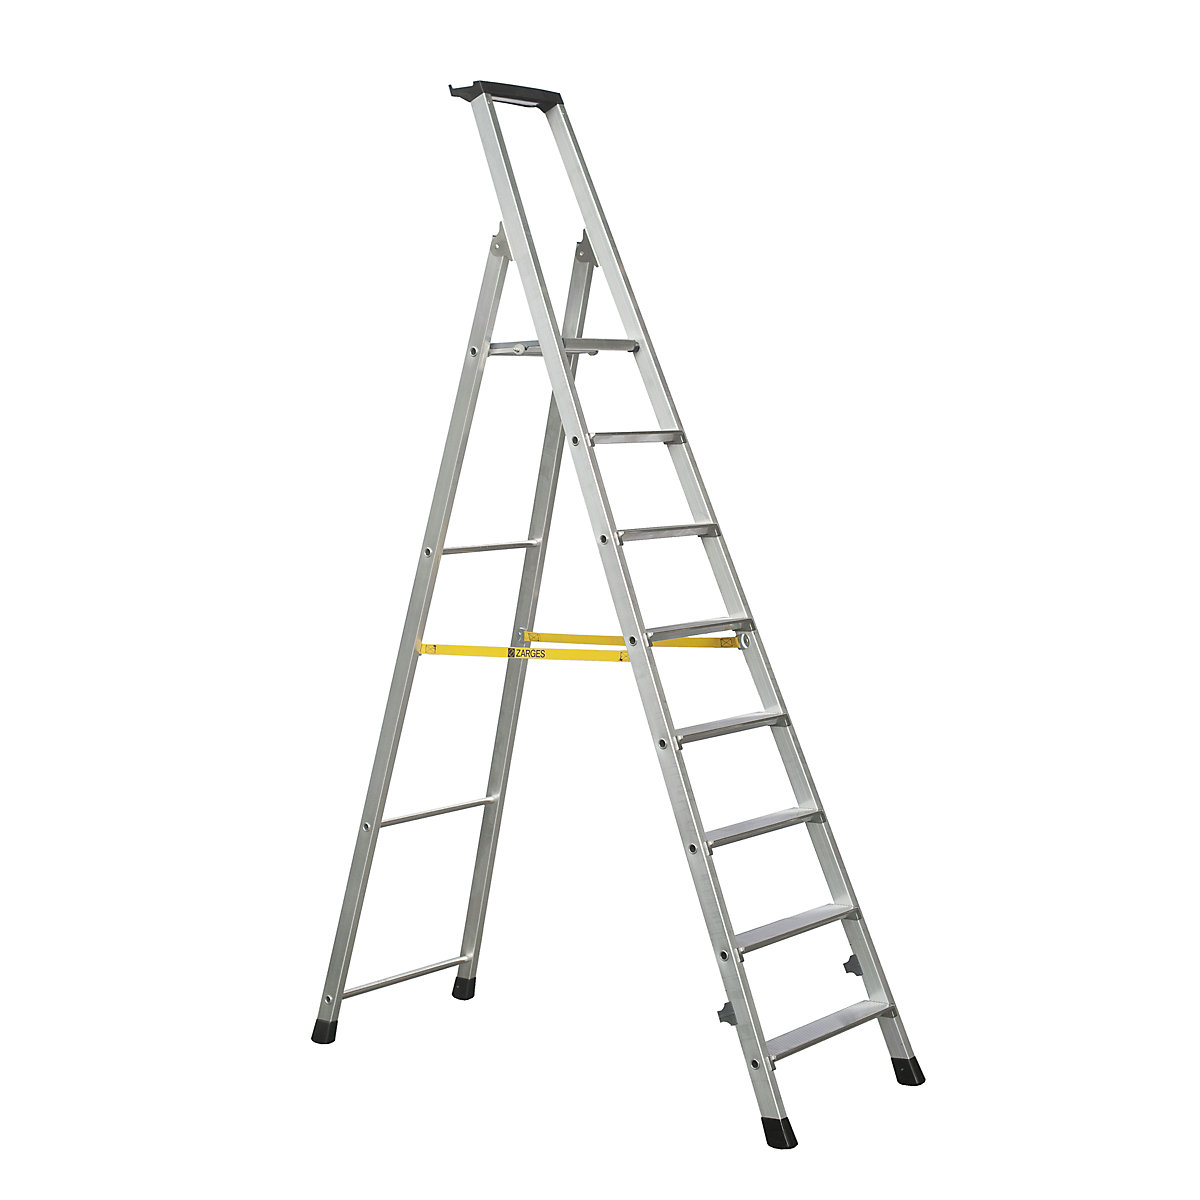 Folding step ladder, single sided access – ZARGES, with storage tray, for light use, 8 steps incl. platform-3